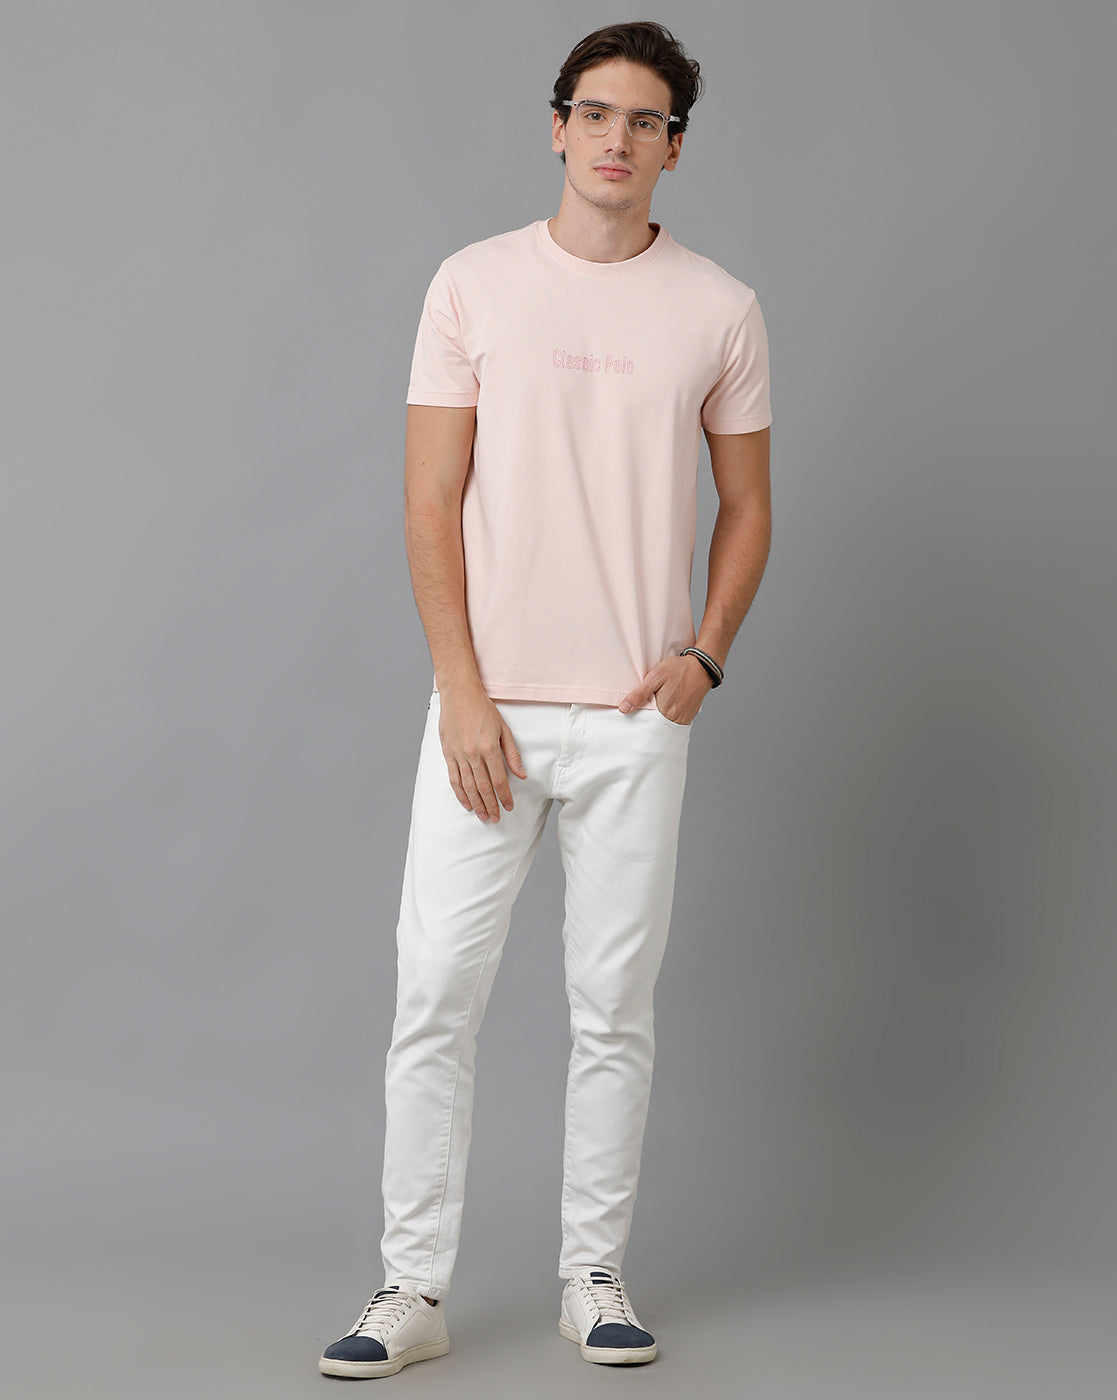 Classic Polo Men's Cotton Half Sleeve Solid Slim Fit Round Neck Pink Color T-Shirt | Baleno - 507 A